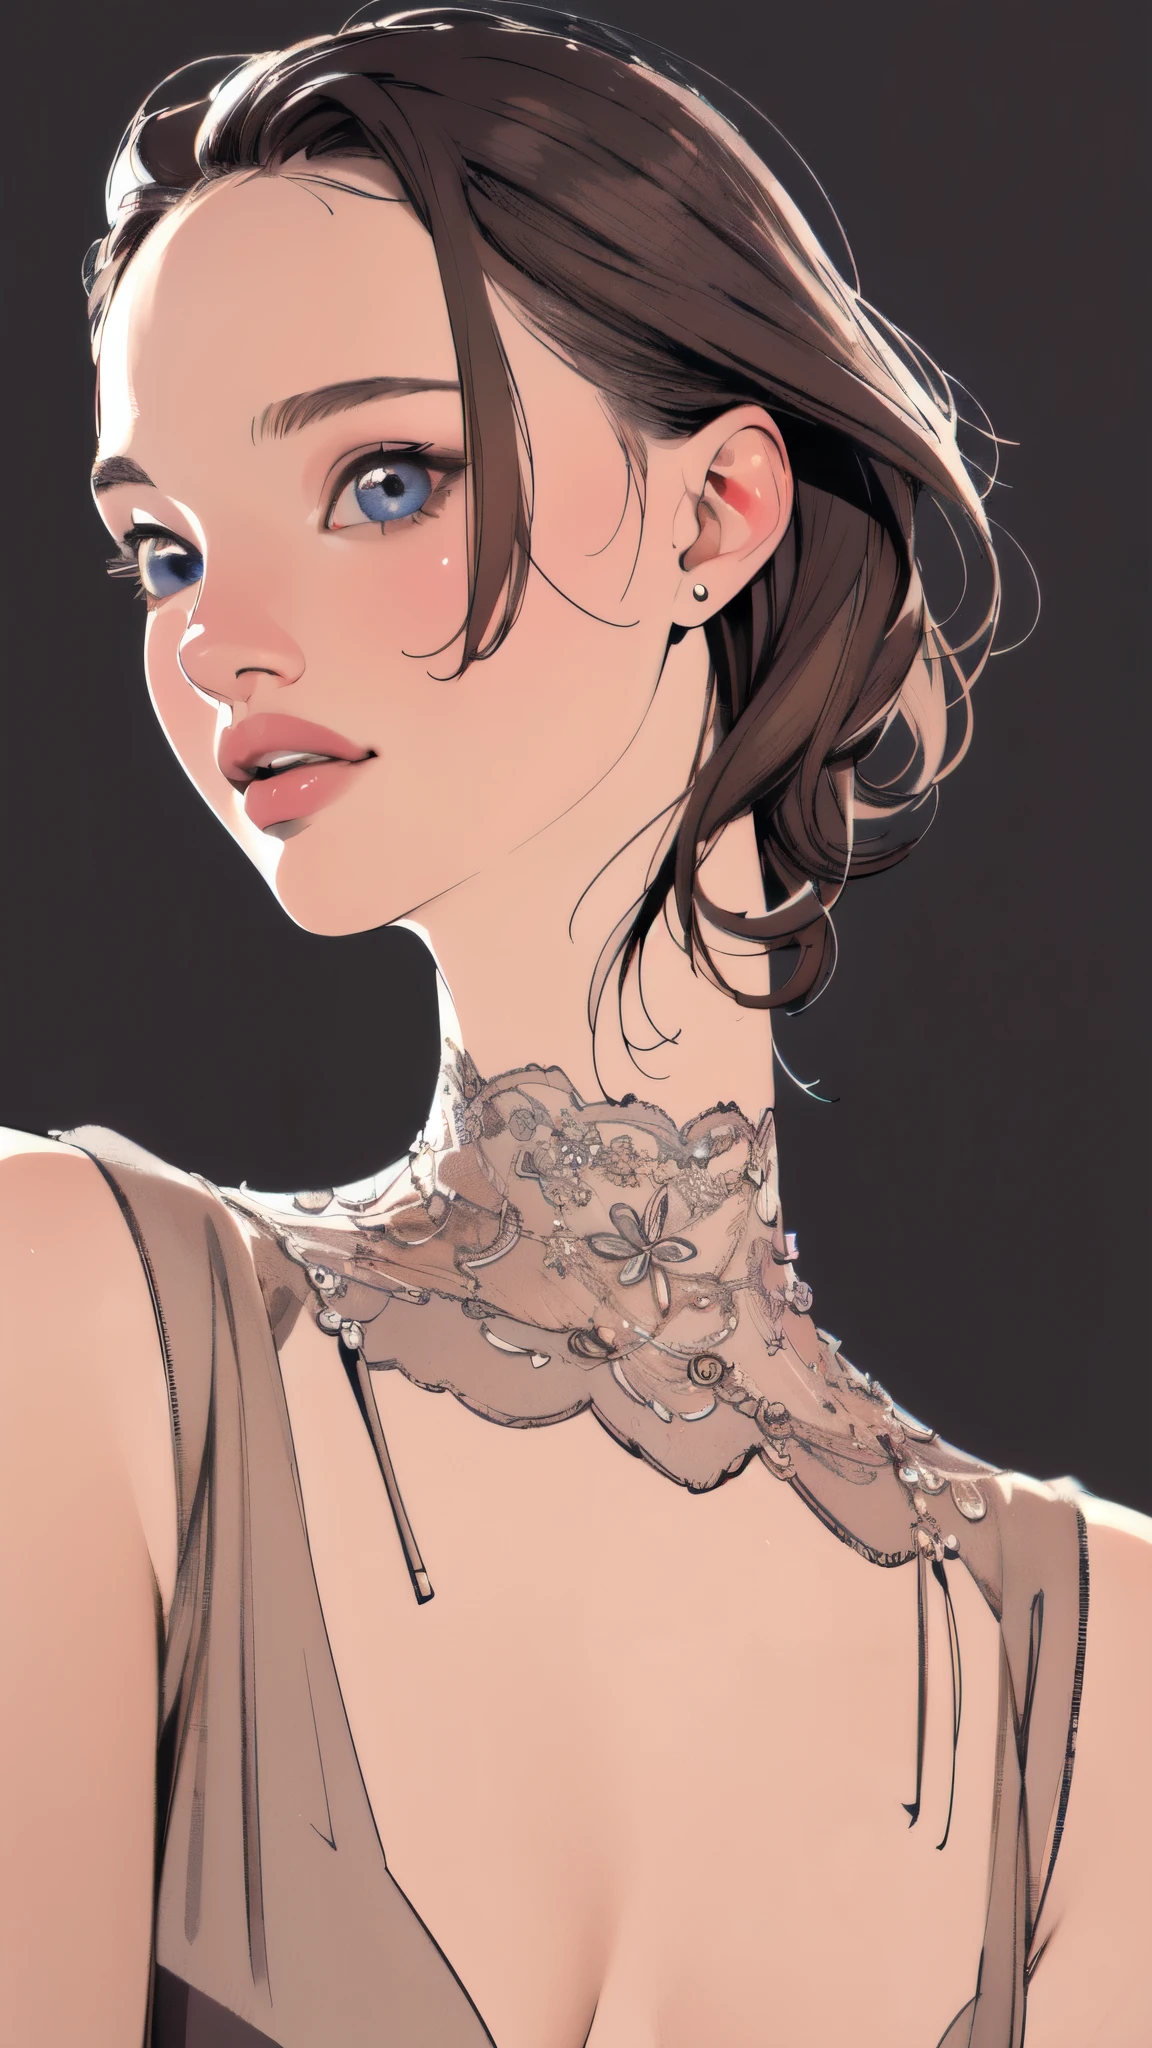 (masterpiece:1.2, Highest quality),8K,wallpaper,(An illustration),(Natalie Portman), Upper body close-up,front,short hair,Wearing a bold dress,Perfect Eyes,Detailed face,,Cool woman